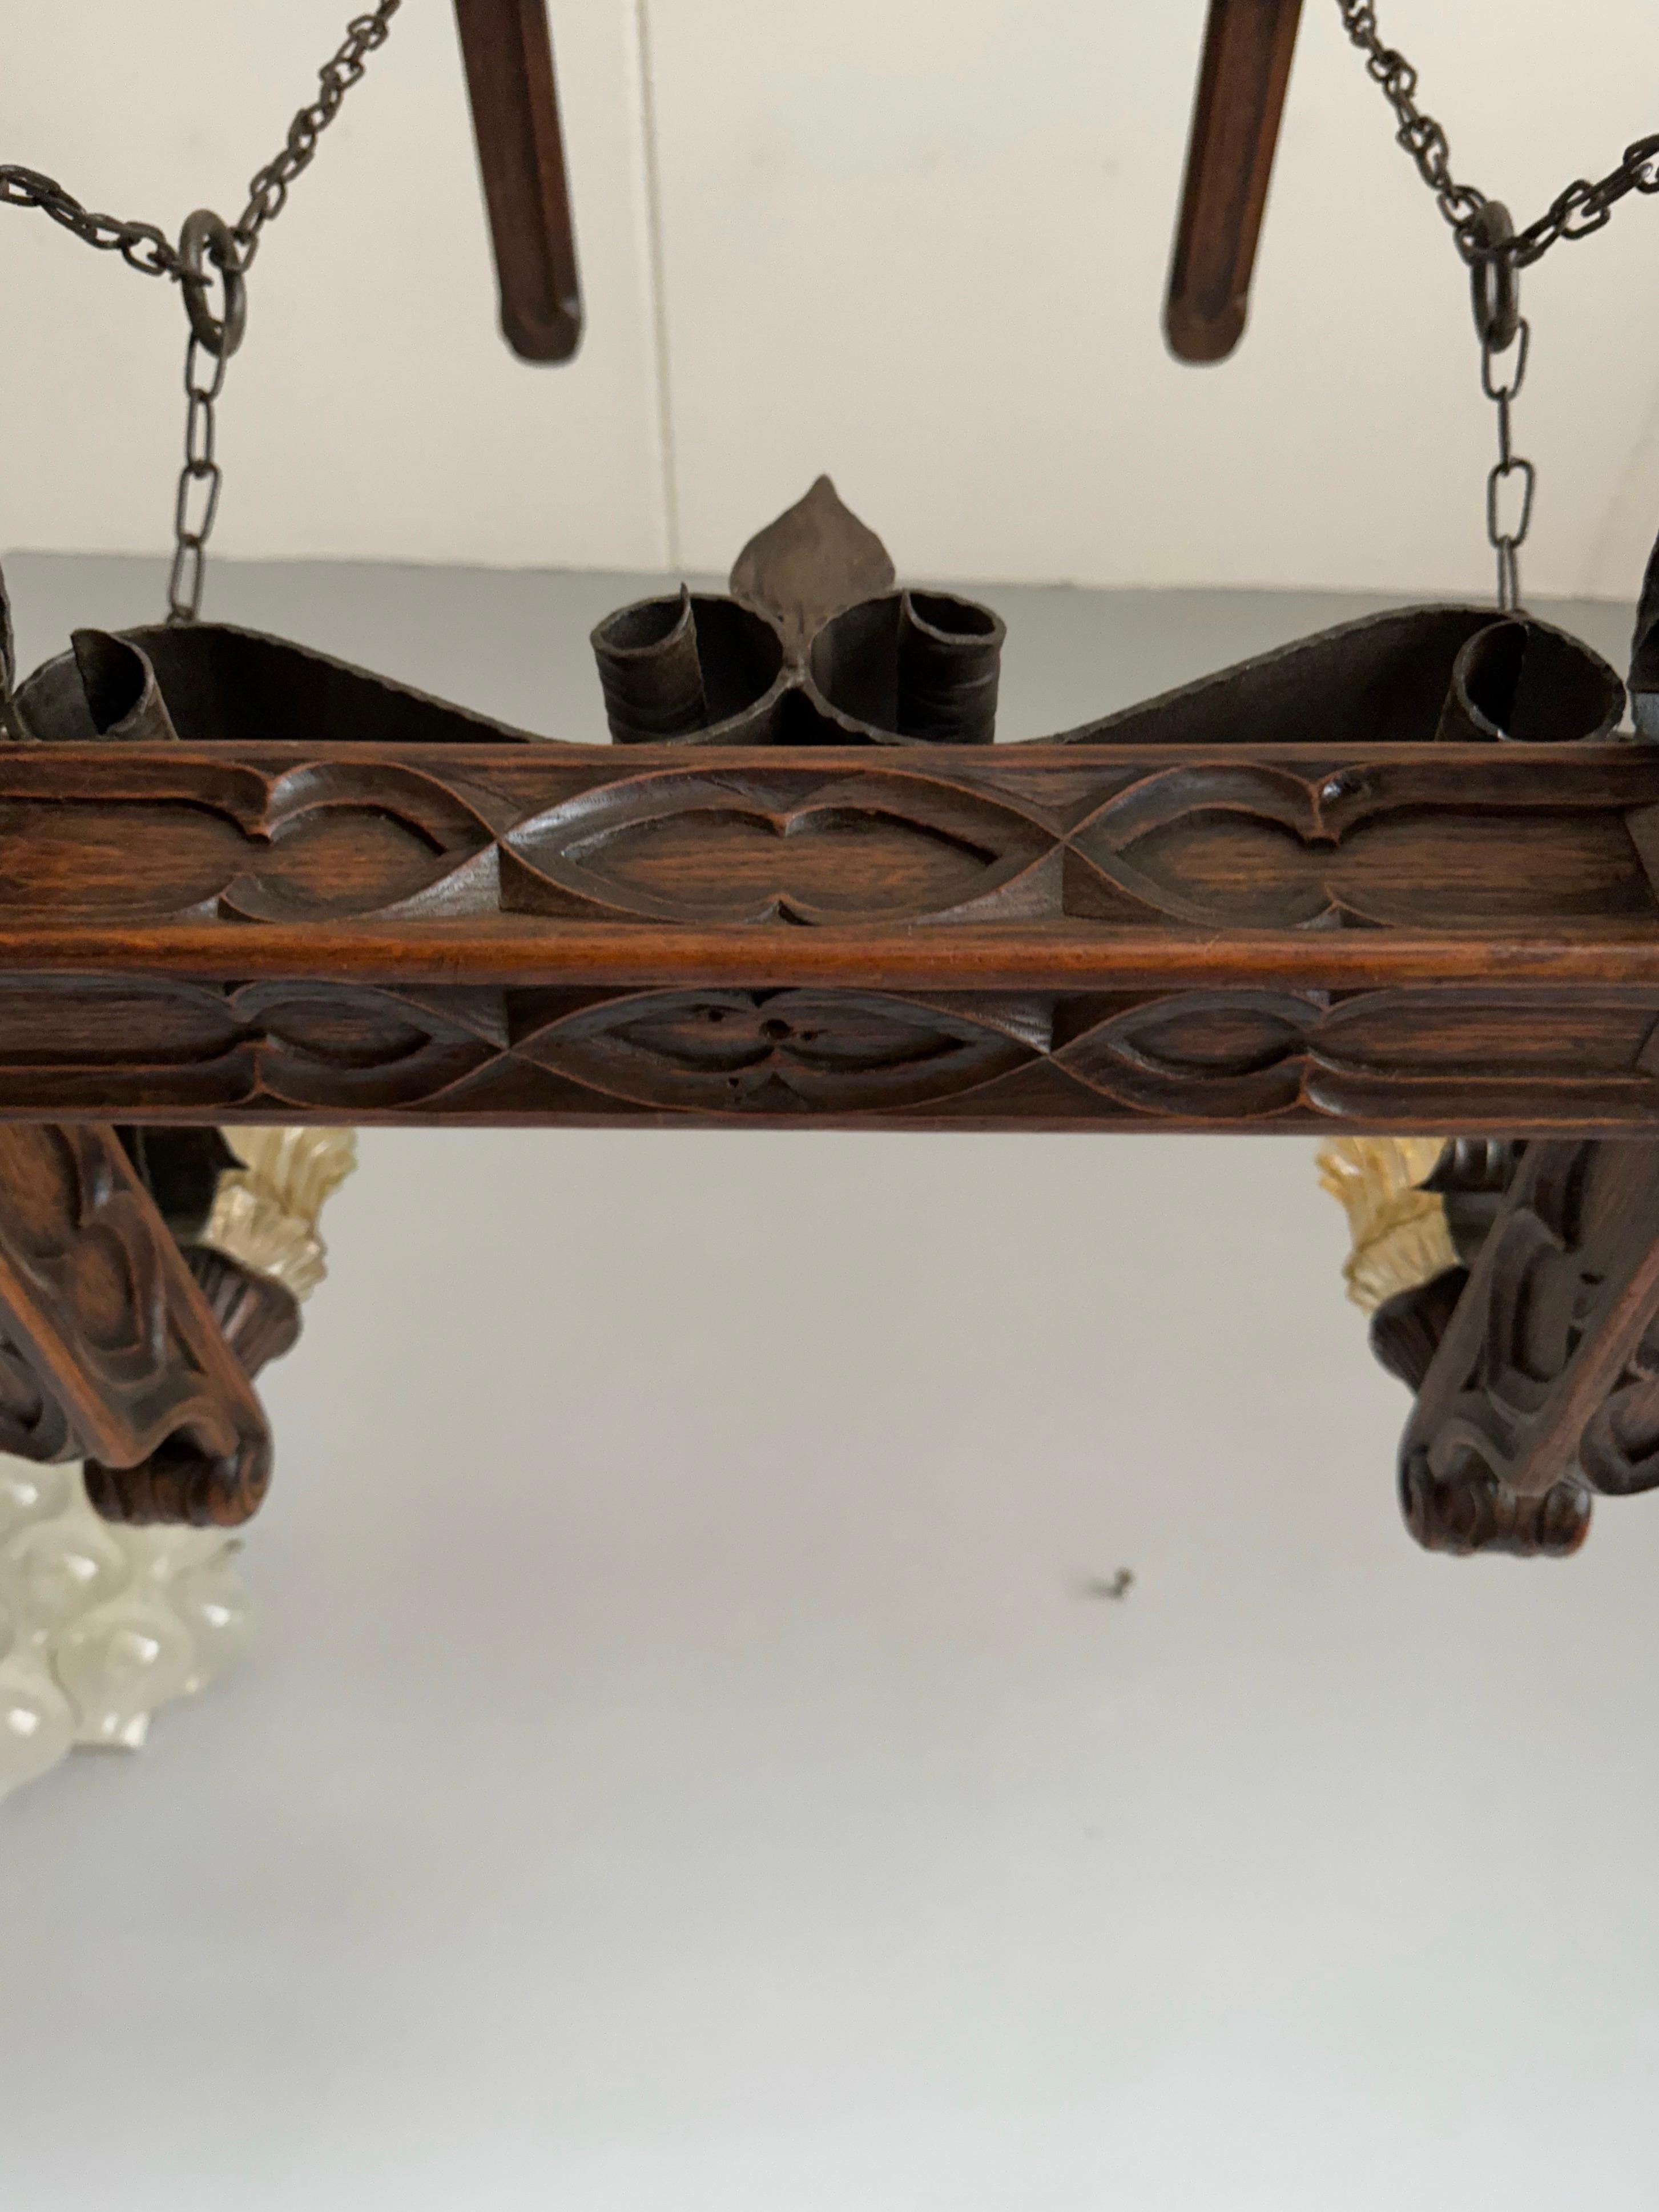 Rare Handcrafted Oak and Iron Gothic Revival Church Pendant Light / Chandelier For Sale 9